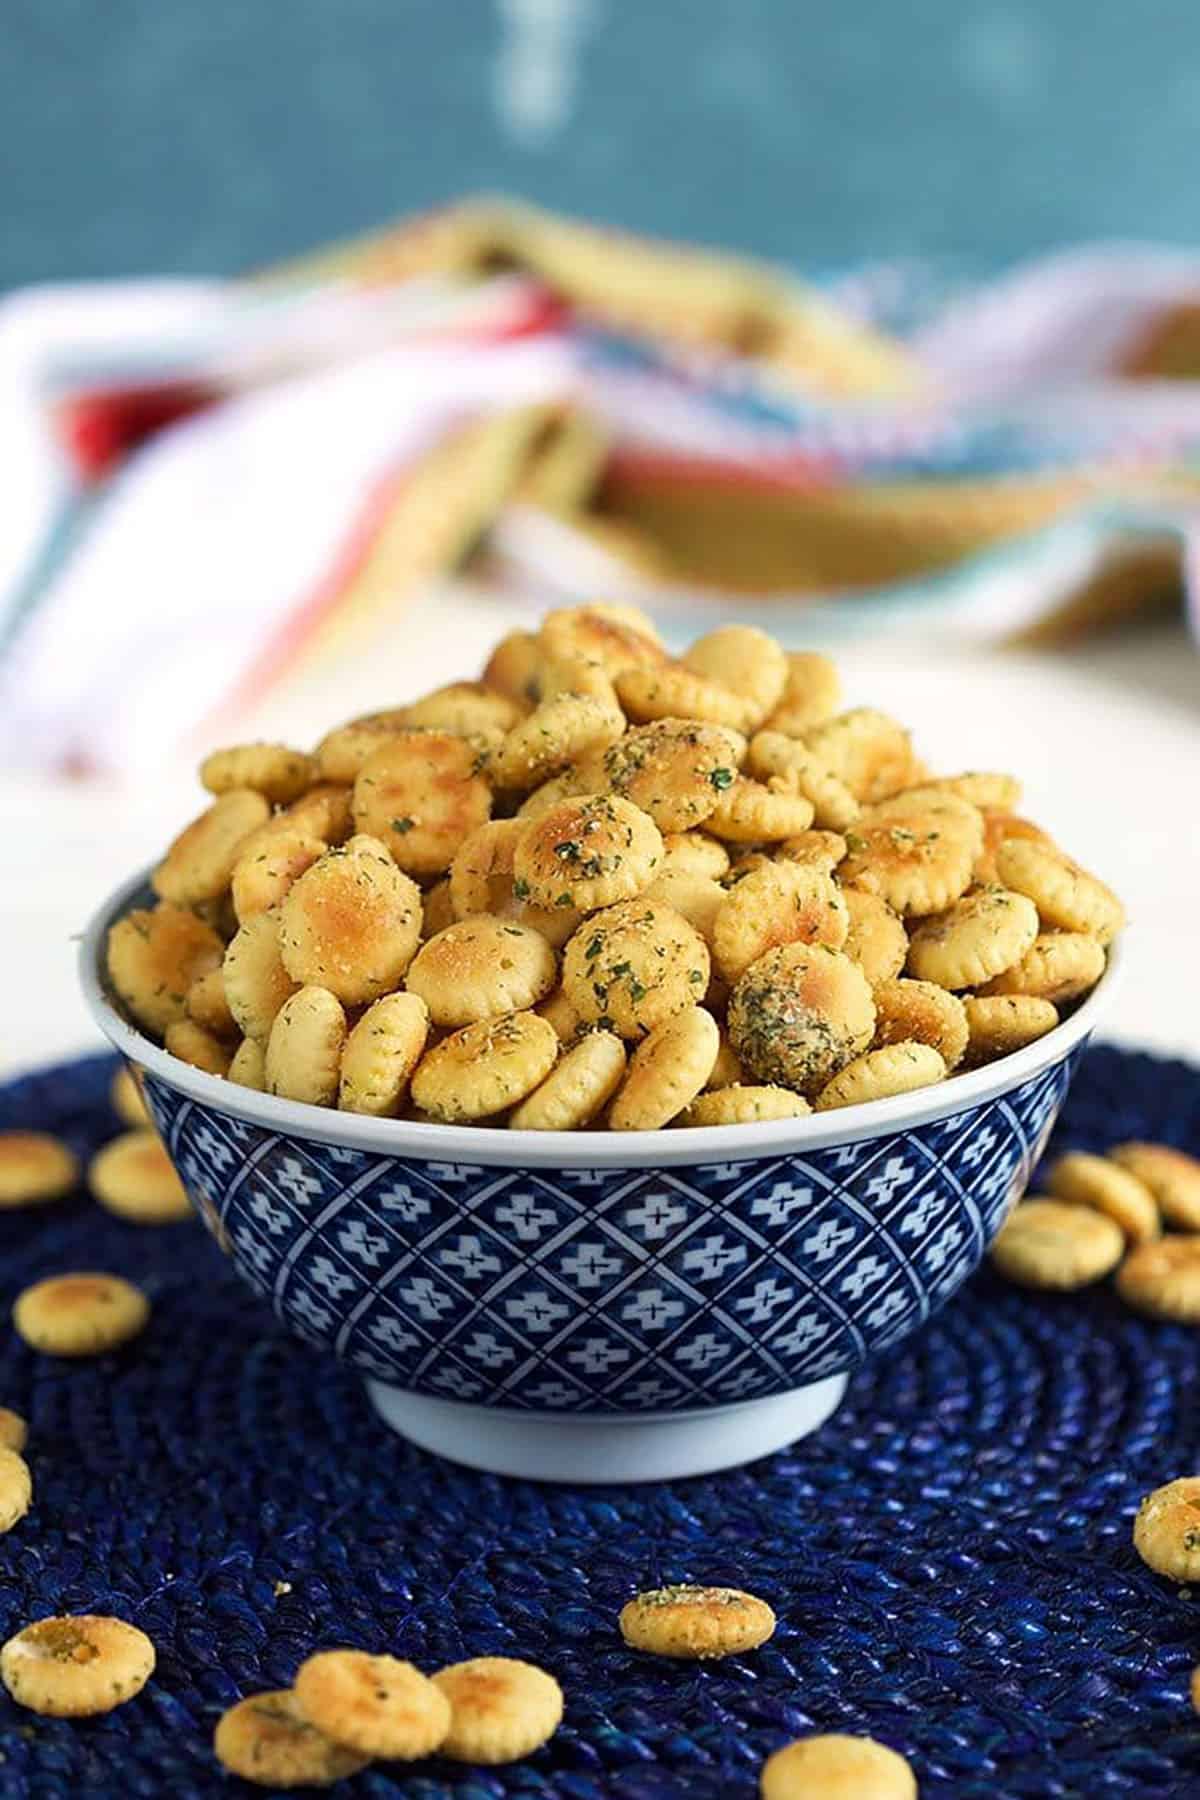 Ranch seasoned oyster crackers in a blue and white bowl.